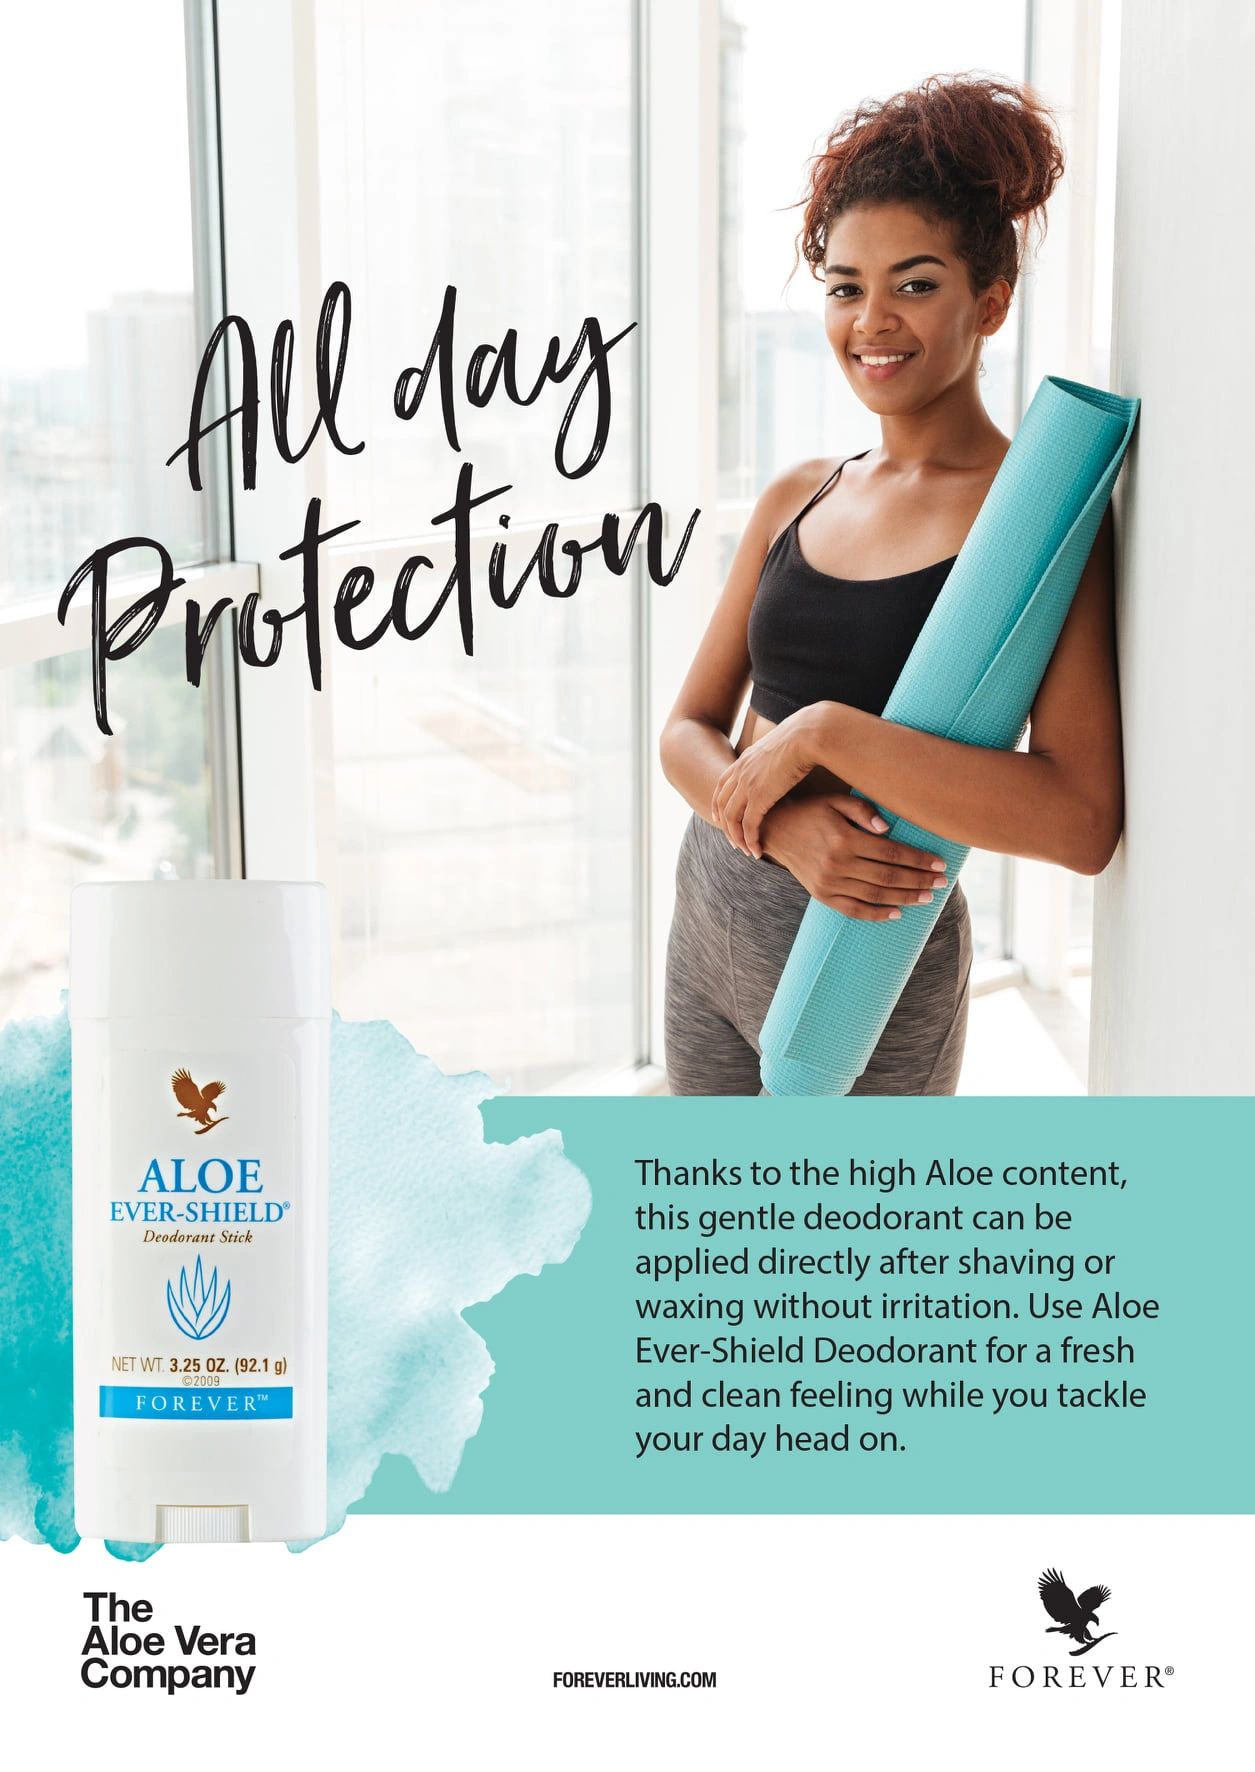 All-day protection against underarm odor